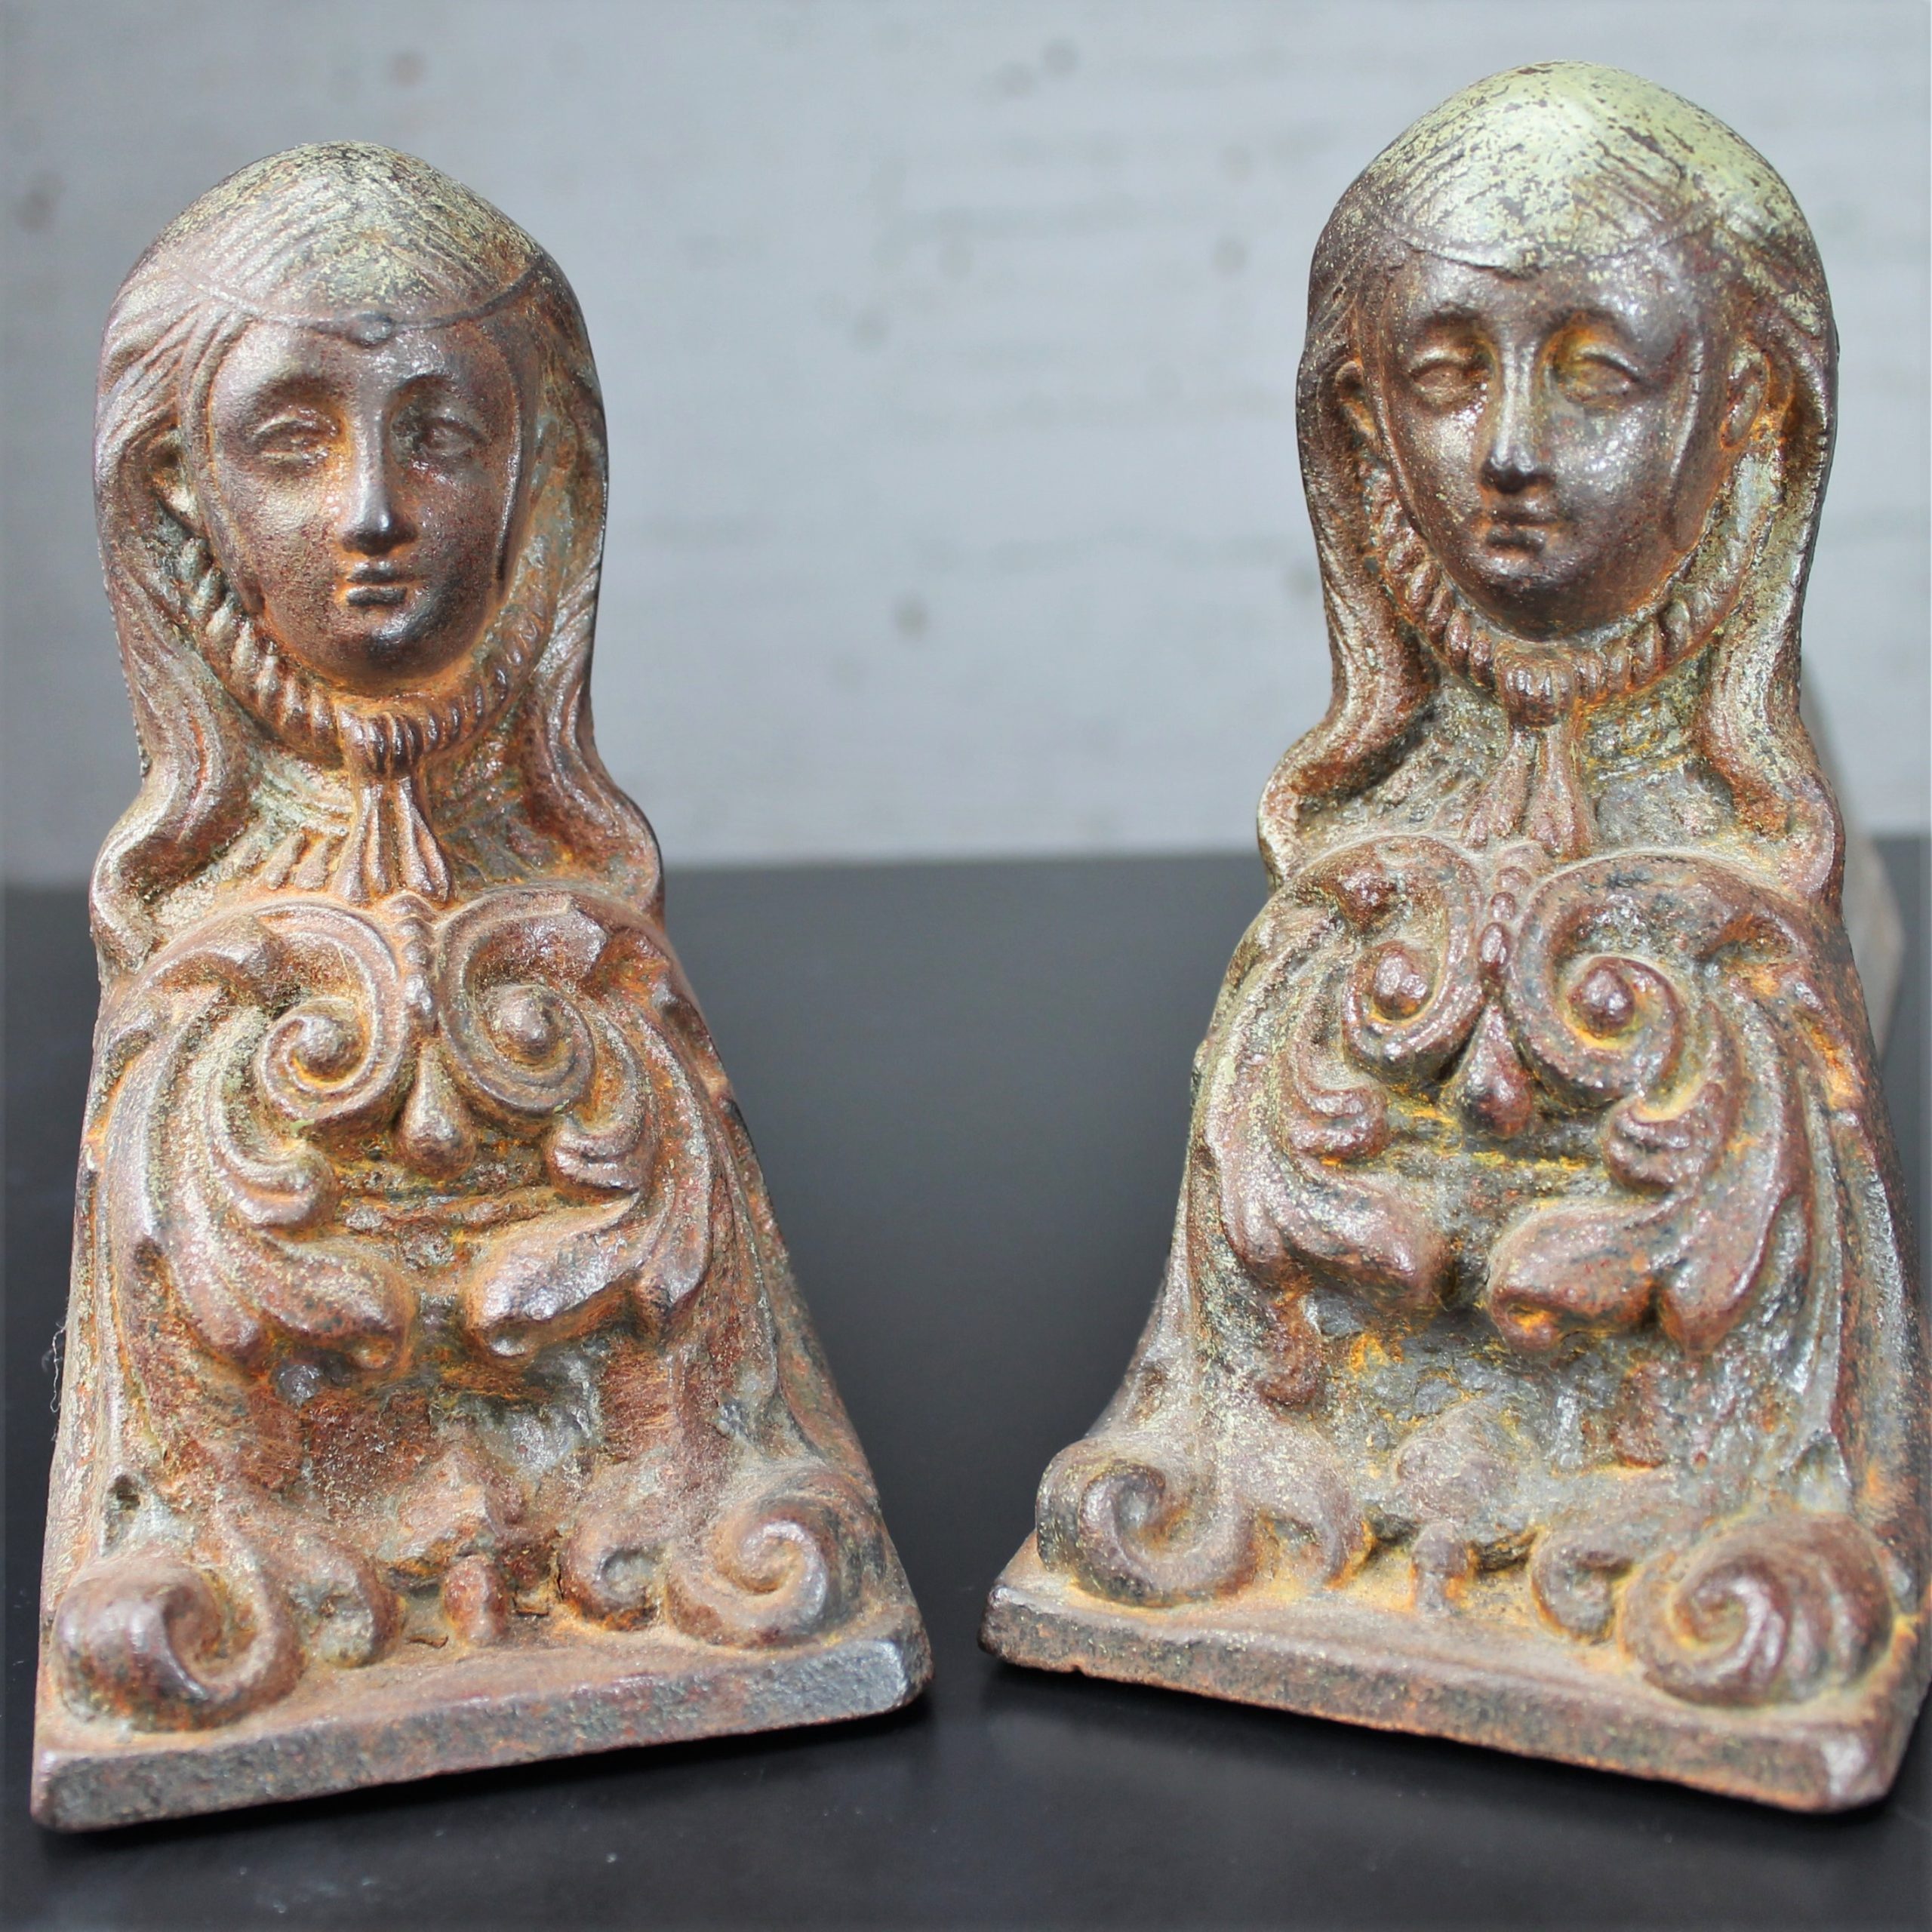 Antique French Cast Iron Female Figural Andirons or Firedogs